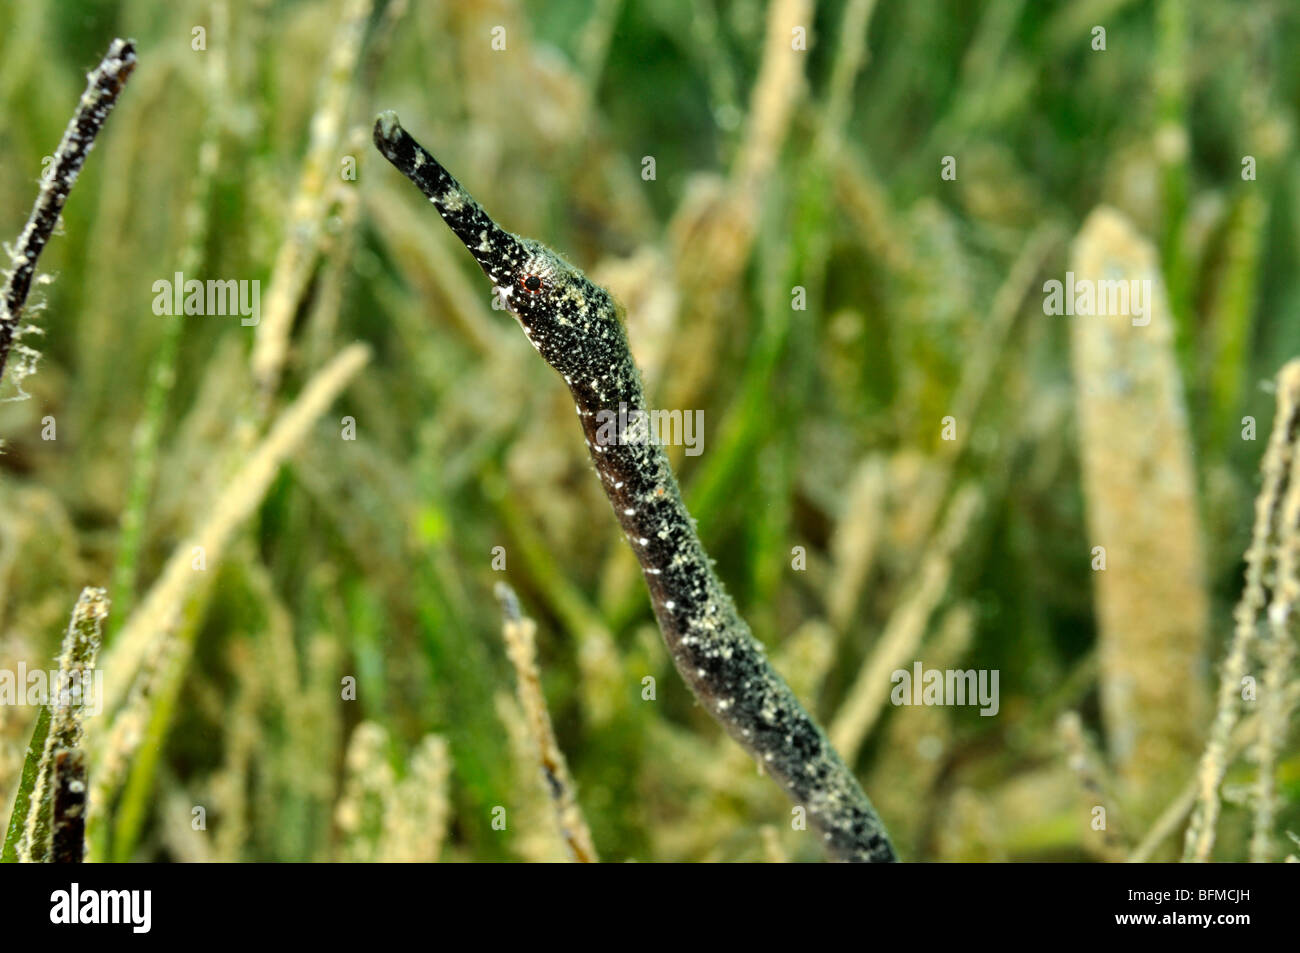 Double-ended pipefish, Trachyrhamphus bicoarctatus, in seagrass. 'Red Sea' Stock Photo